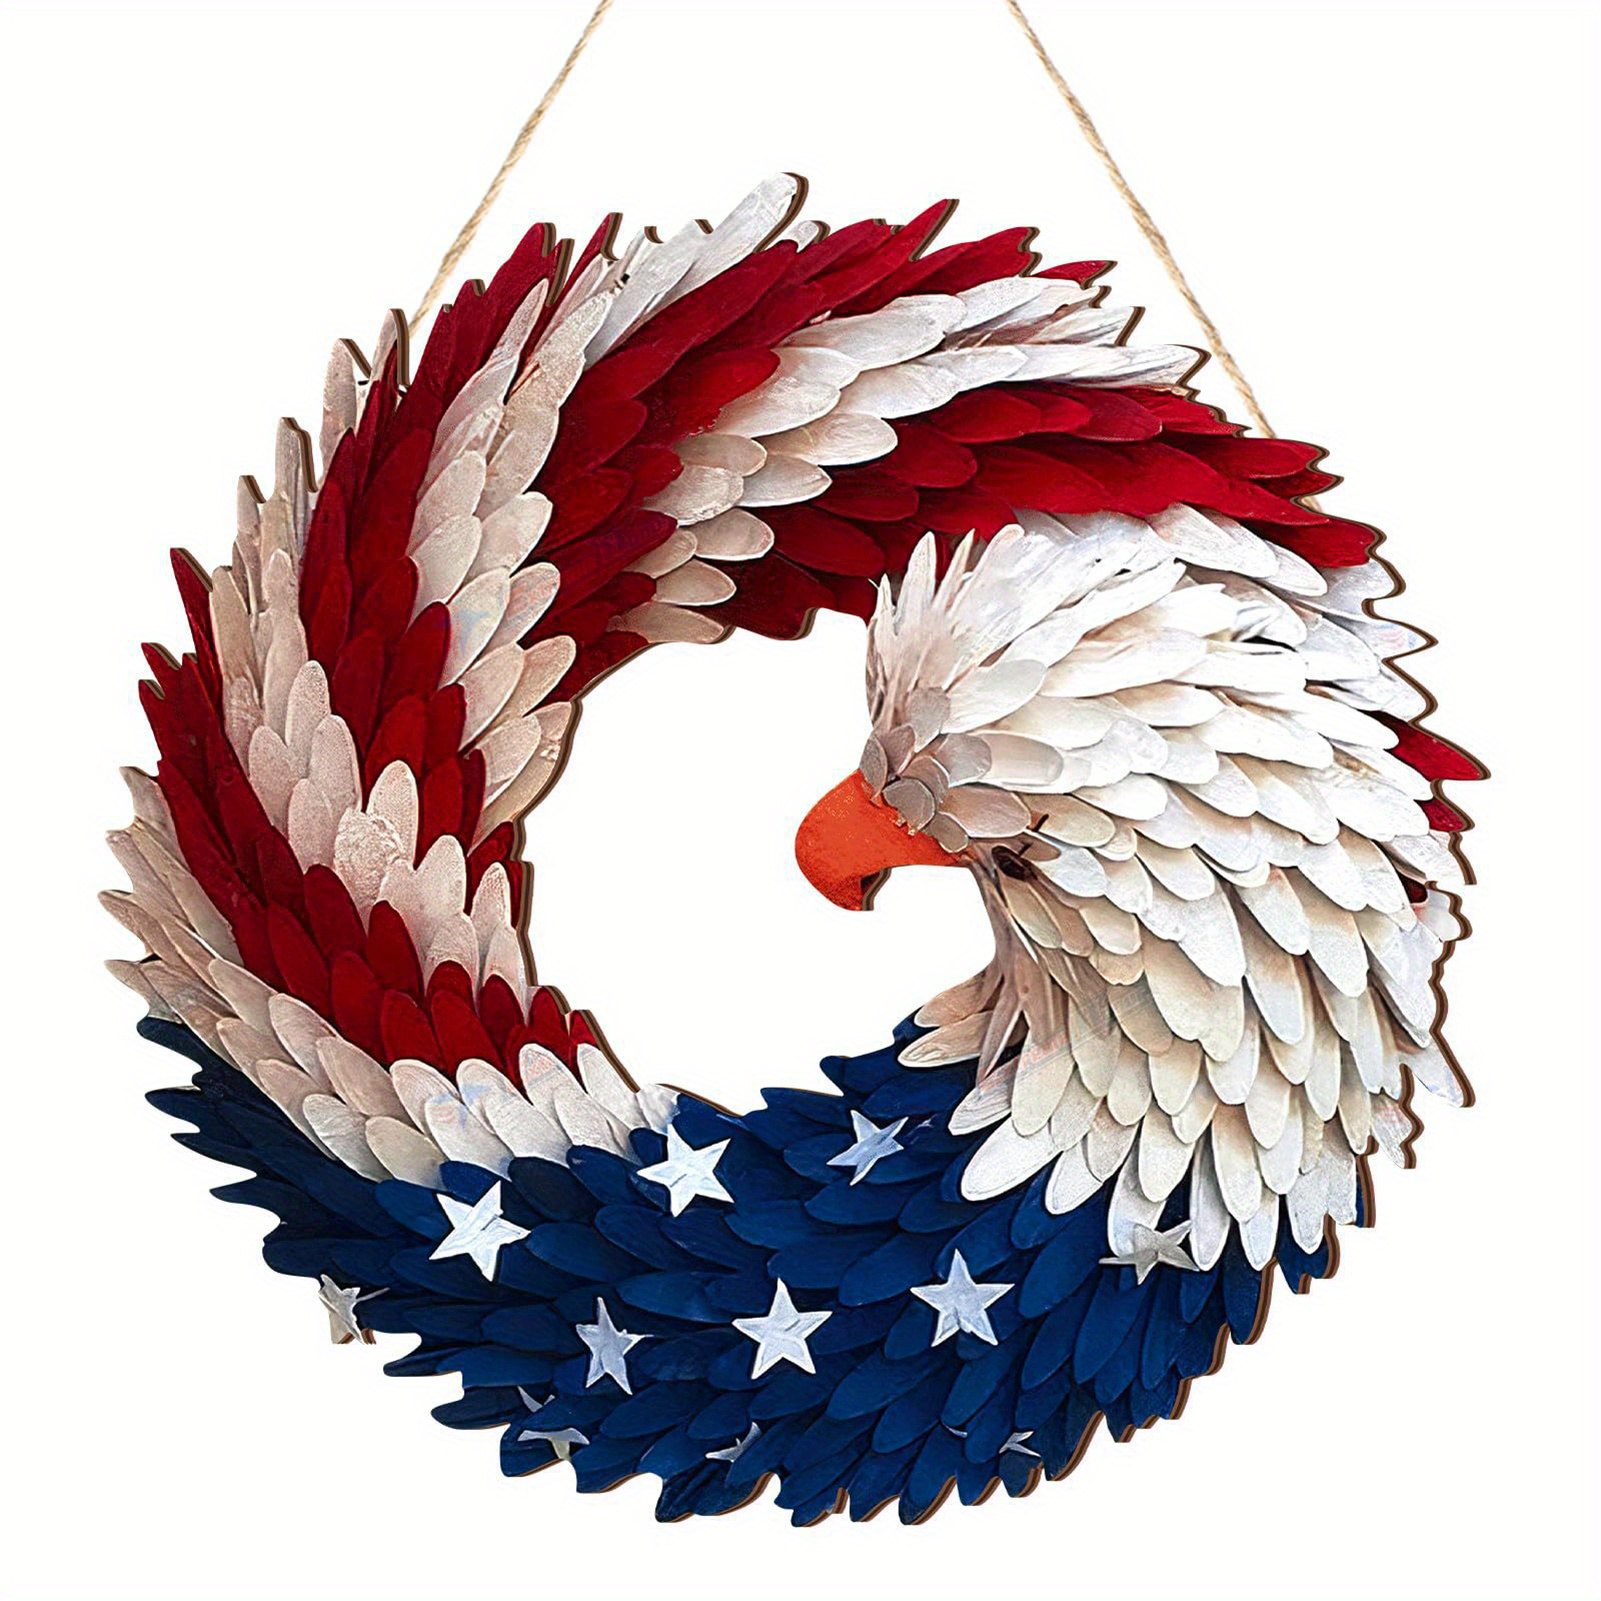 

30cm Independence Day Patriotic Eagle Wooden Plaque Bird Indoor Outdoor Front Door Wall Hanging Pendant 4th Of July Festival Decoration